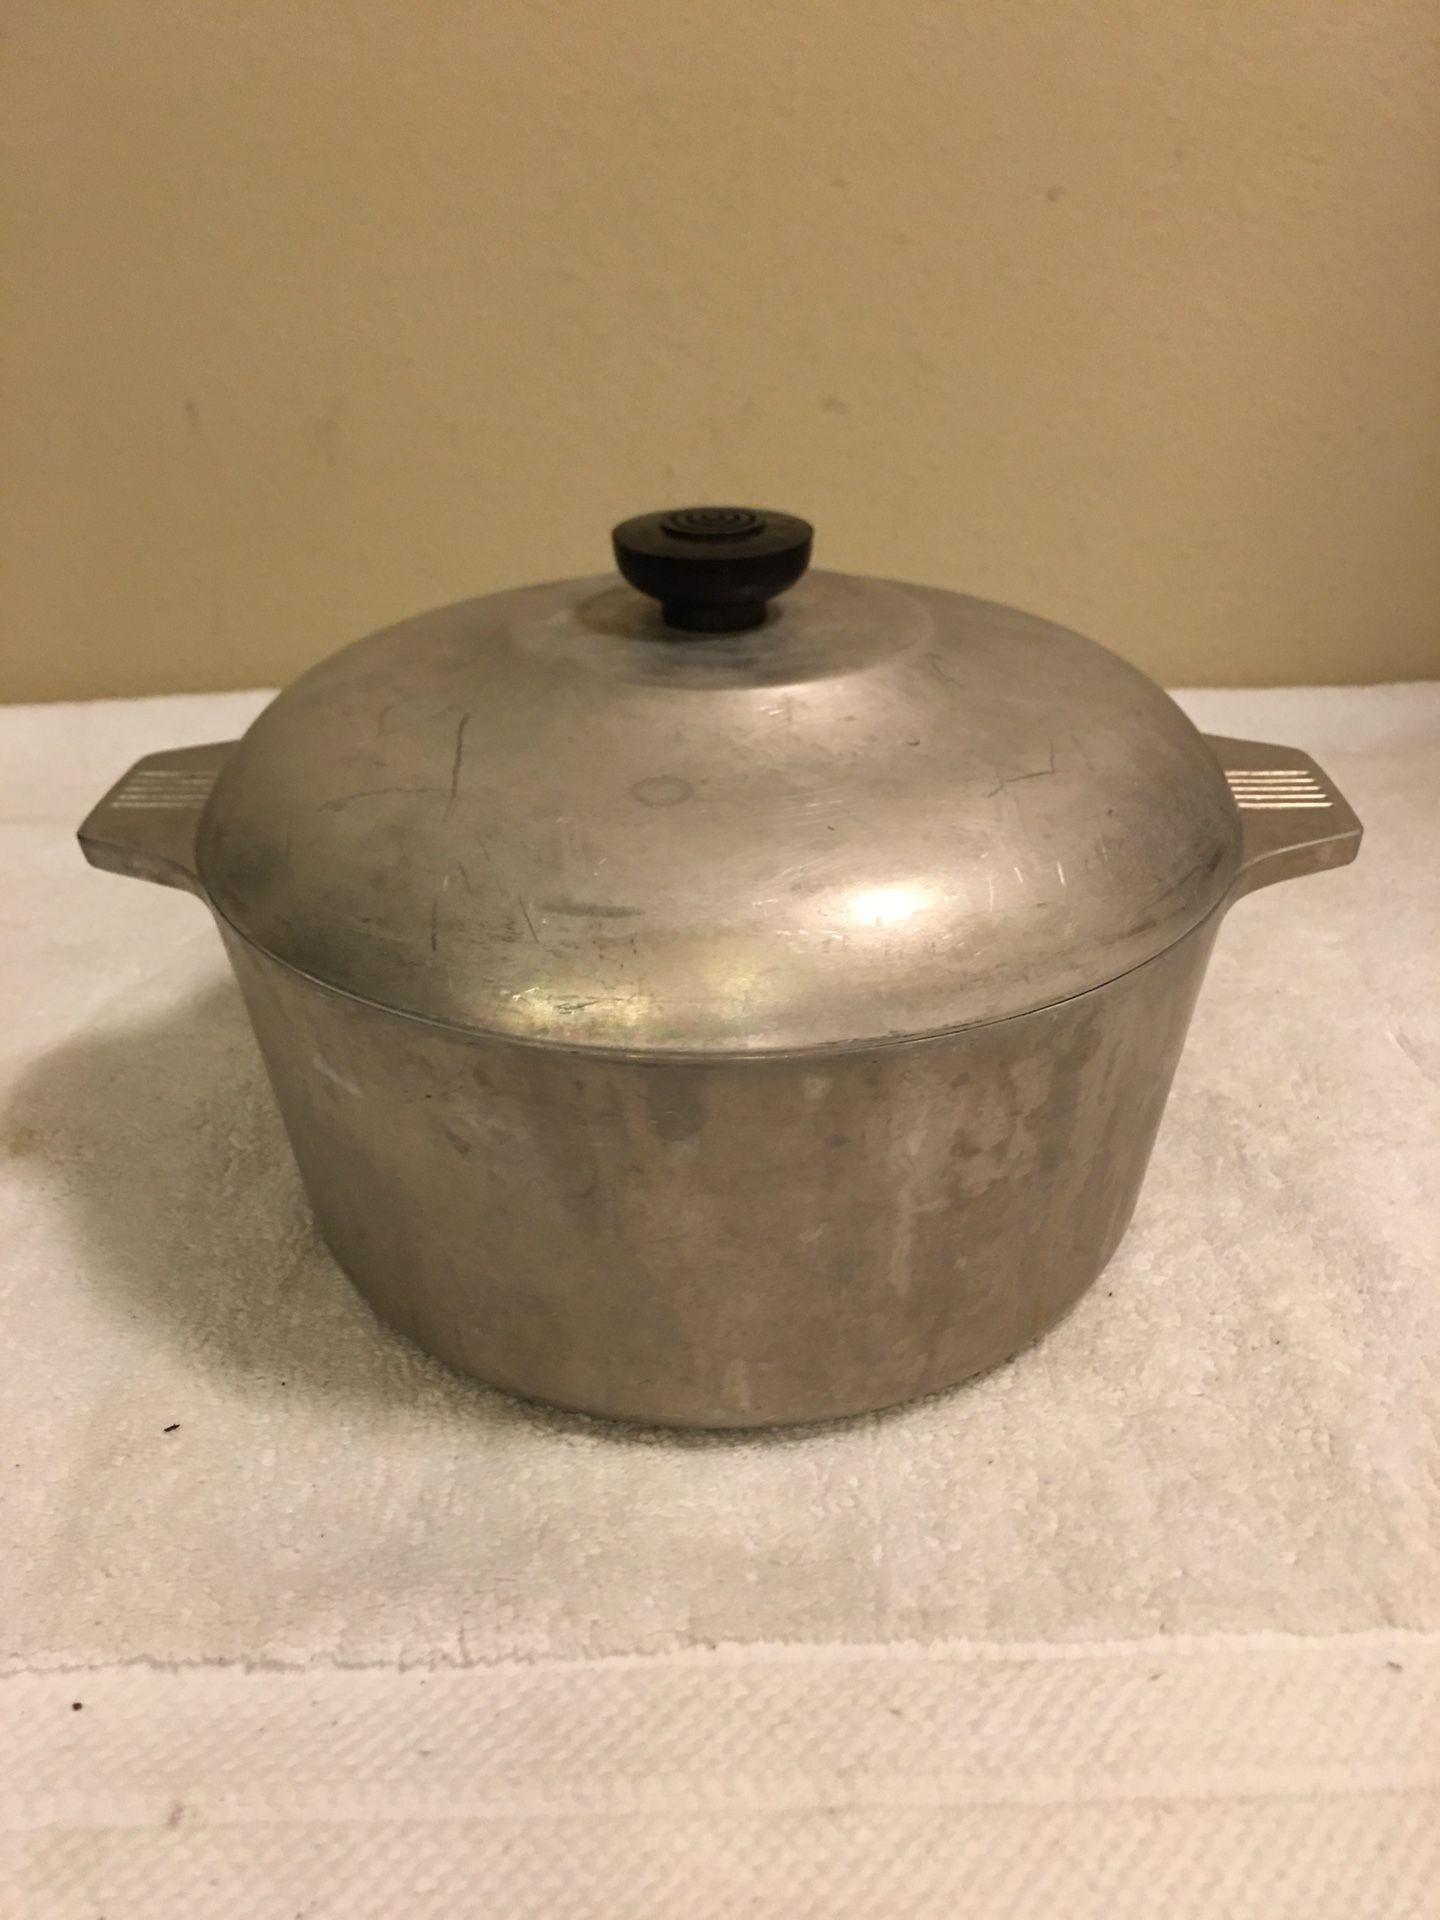 Magnalite Professional Anondized Cookware for Sale in Seattle, WA - OfferUp